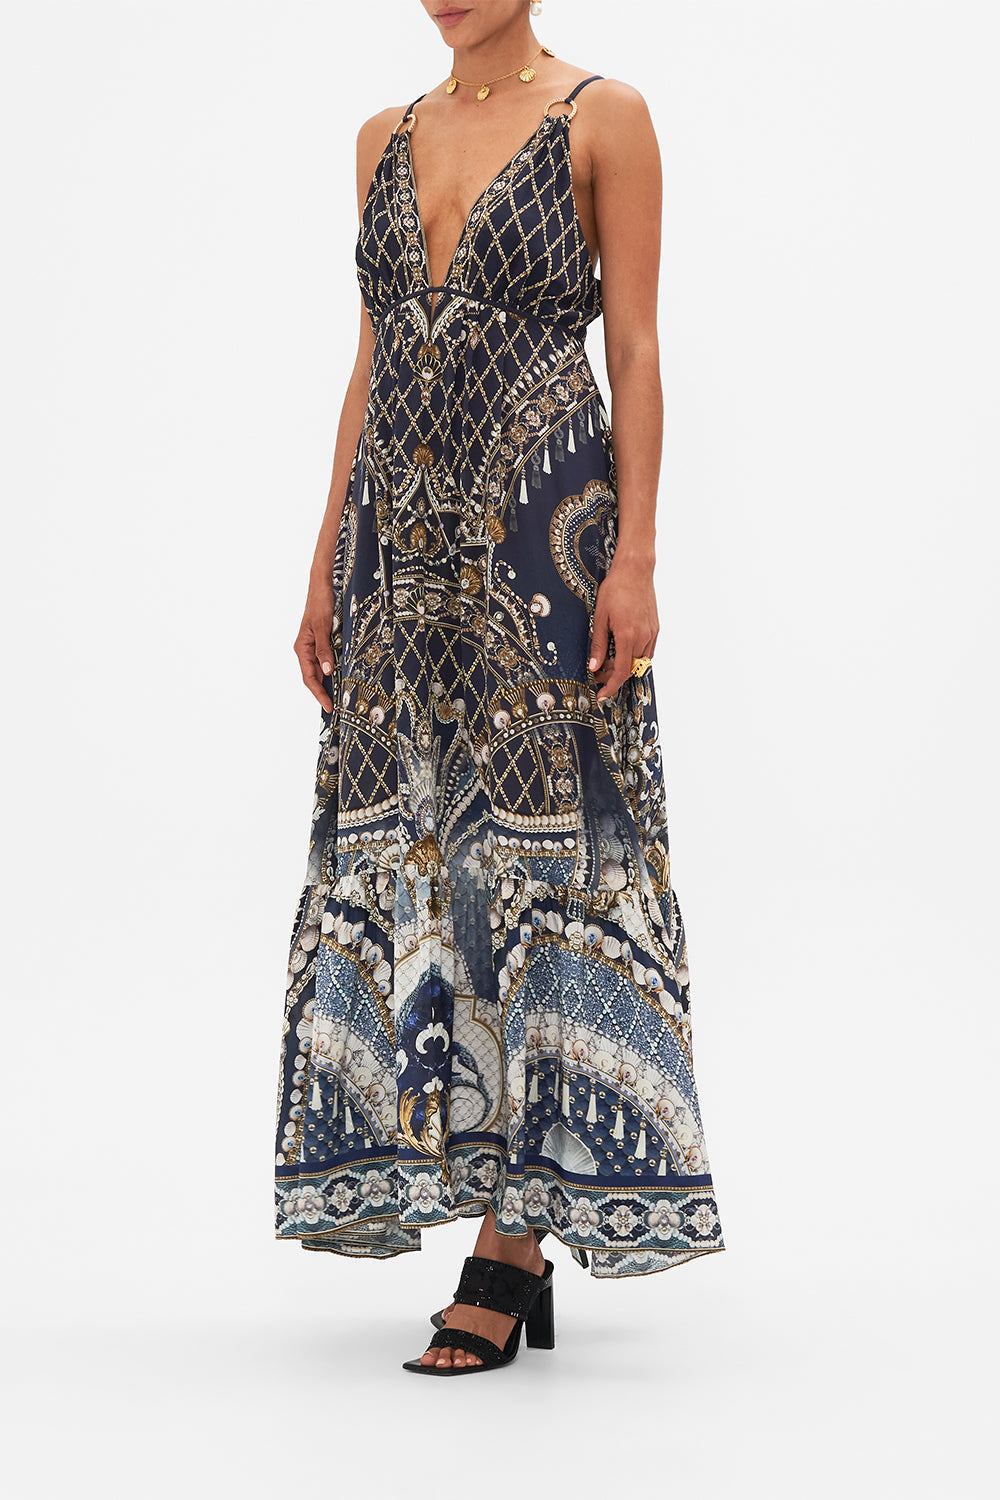 CAMILLA silk tiered dress in Dance With The Duke print